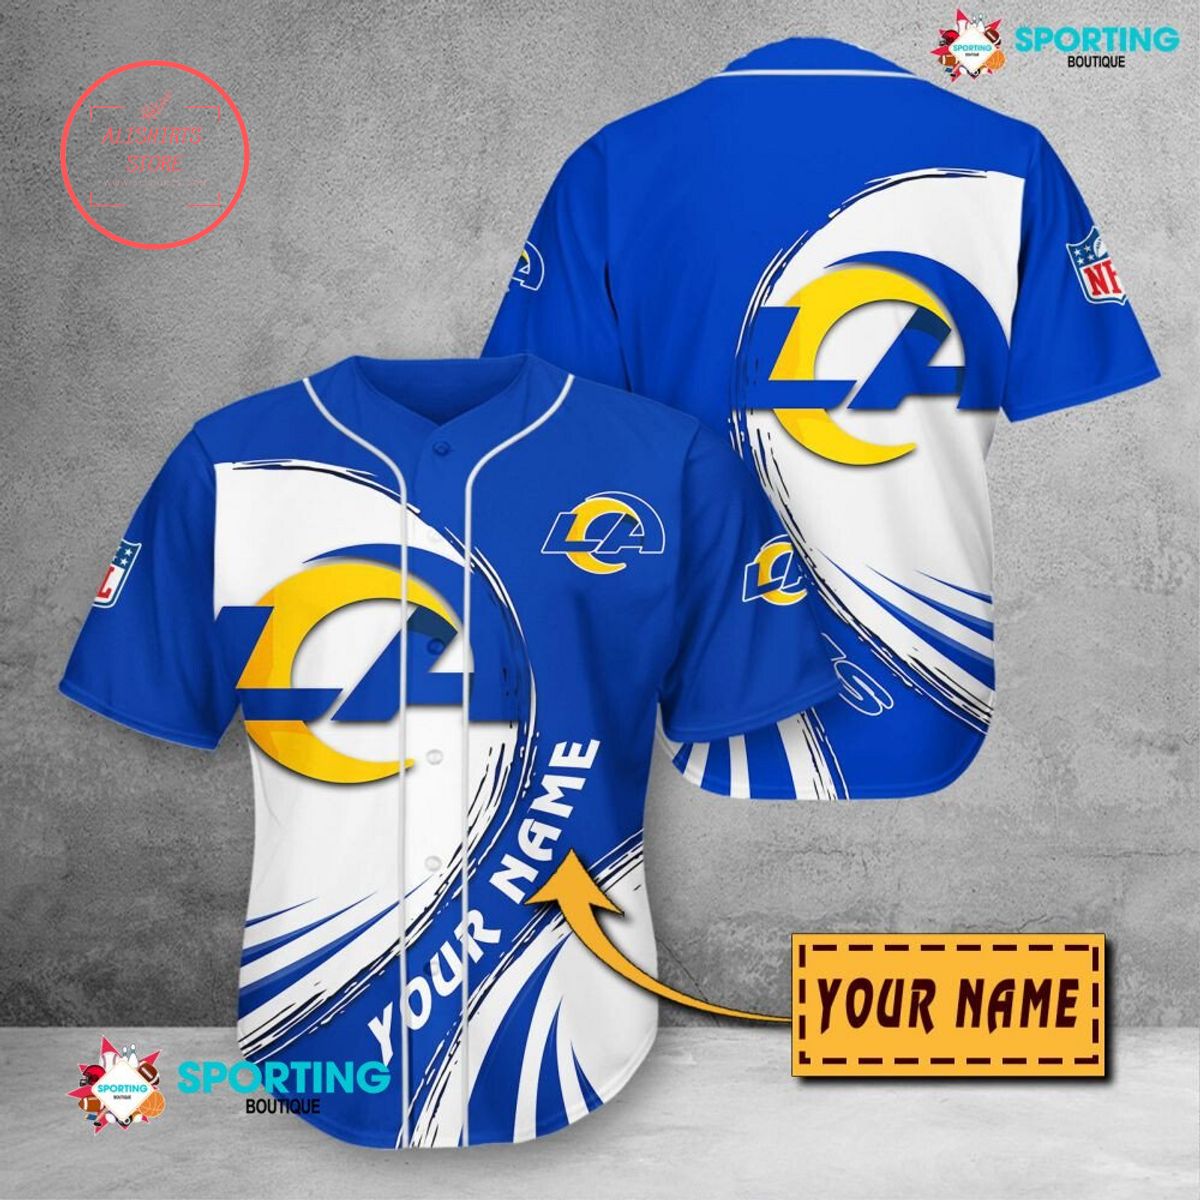 Los Angeles Rams NFL Personalized Baseball Jersey